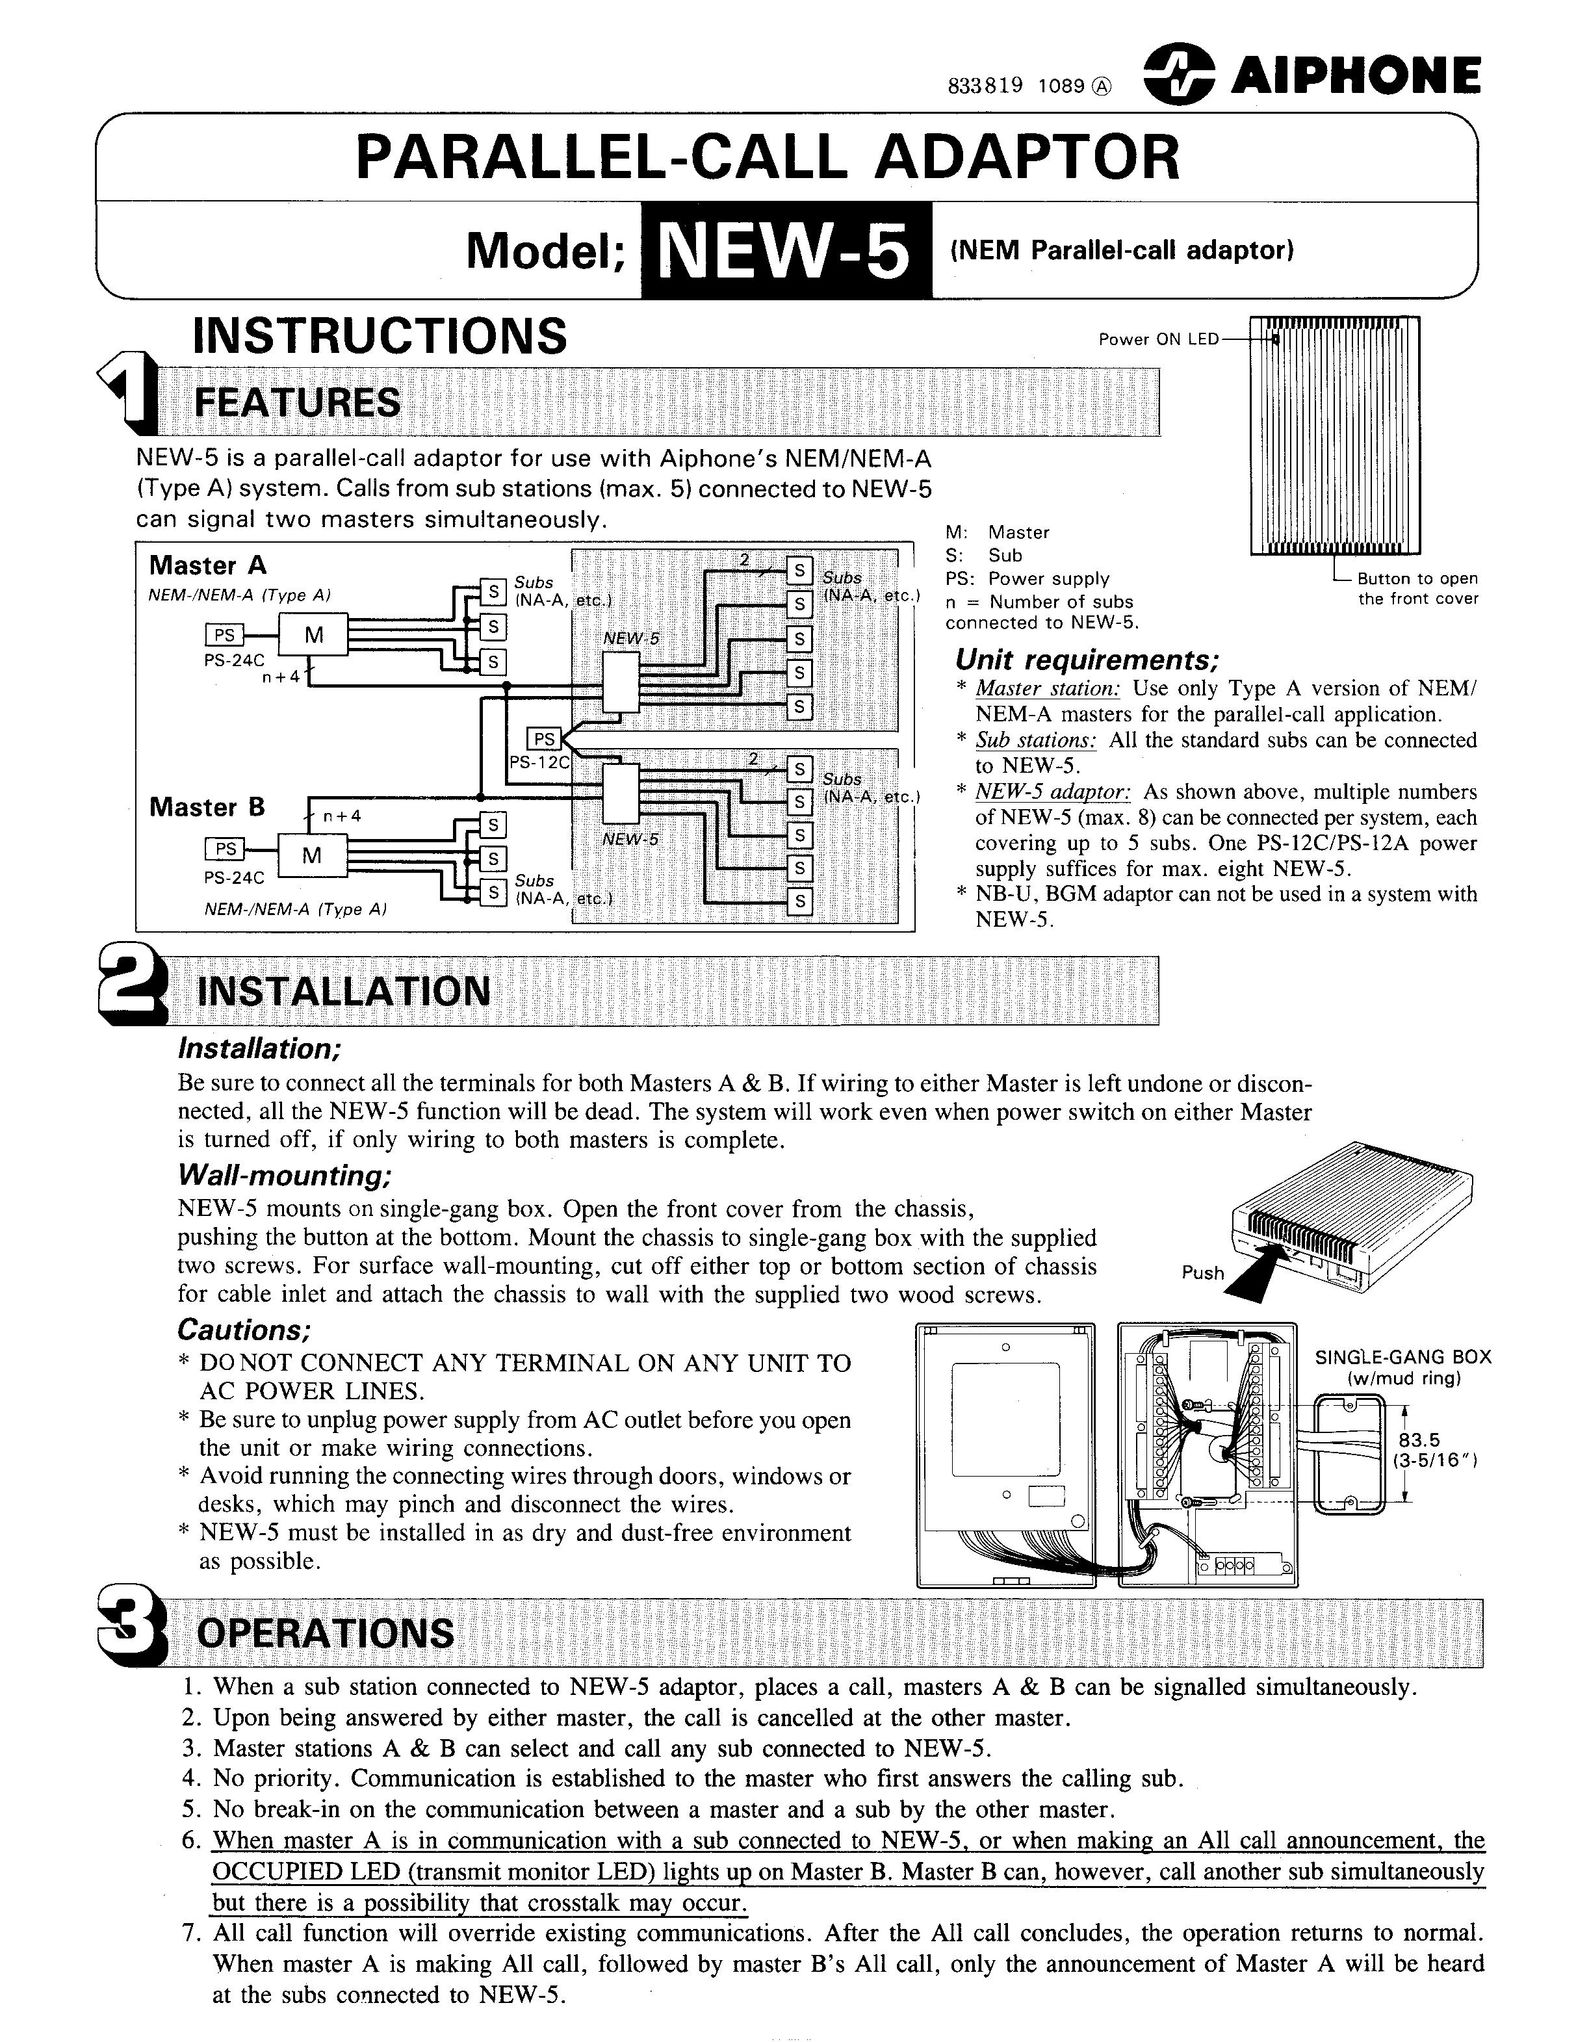 Aiphone NEW-5 Telephone Accessories User Manual